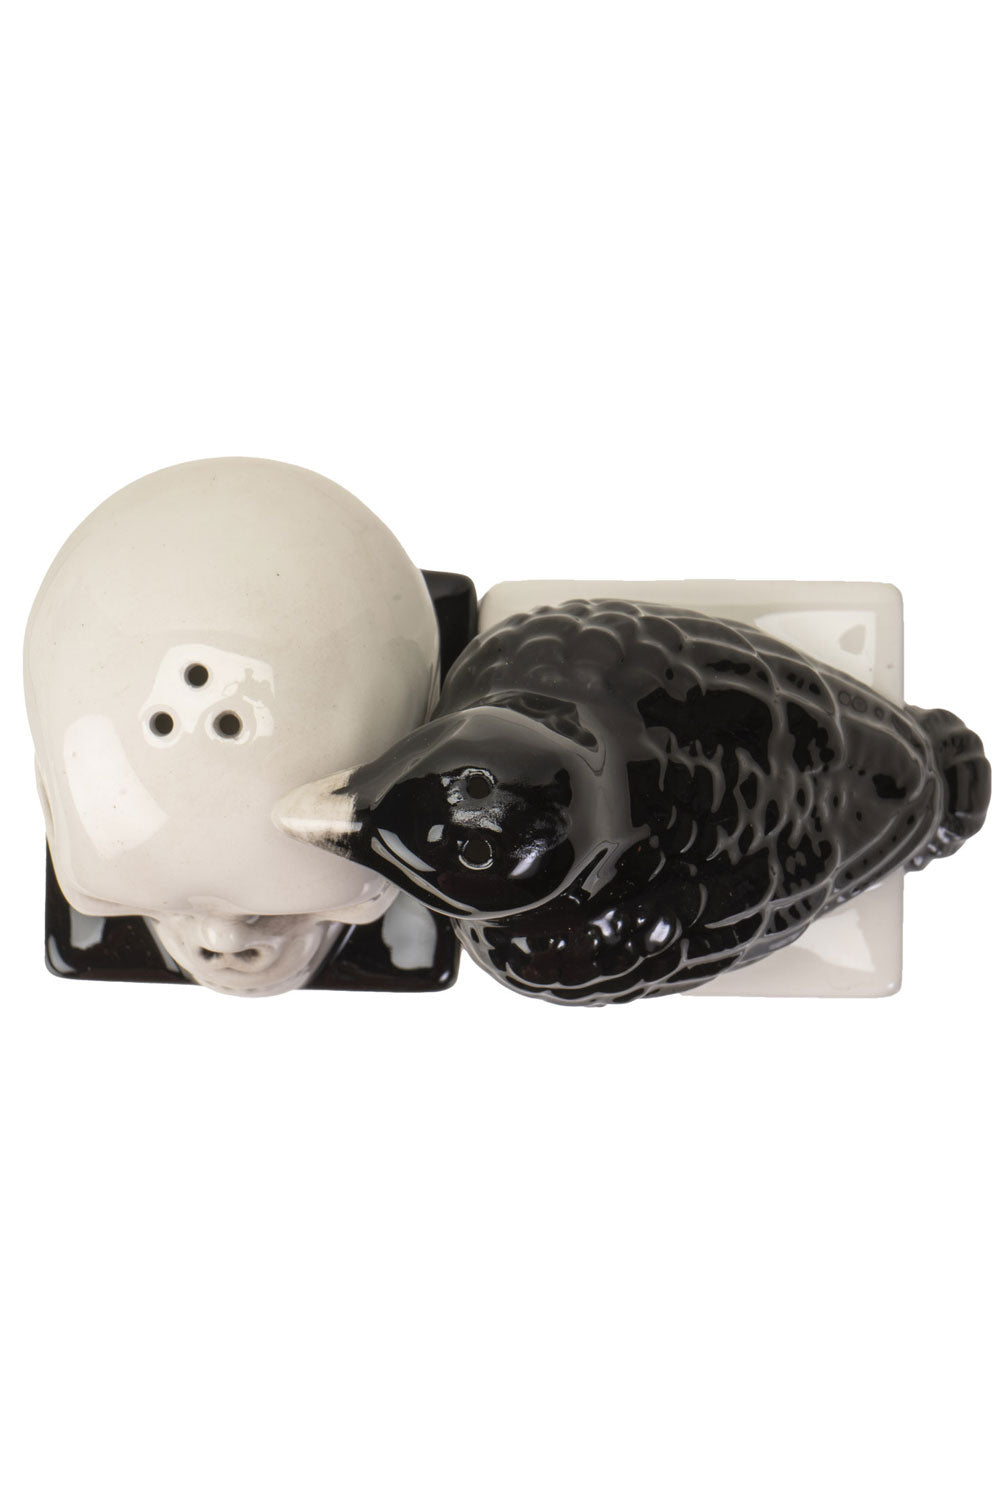 salt and pepper shakers gothic